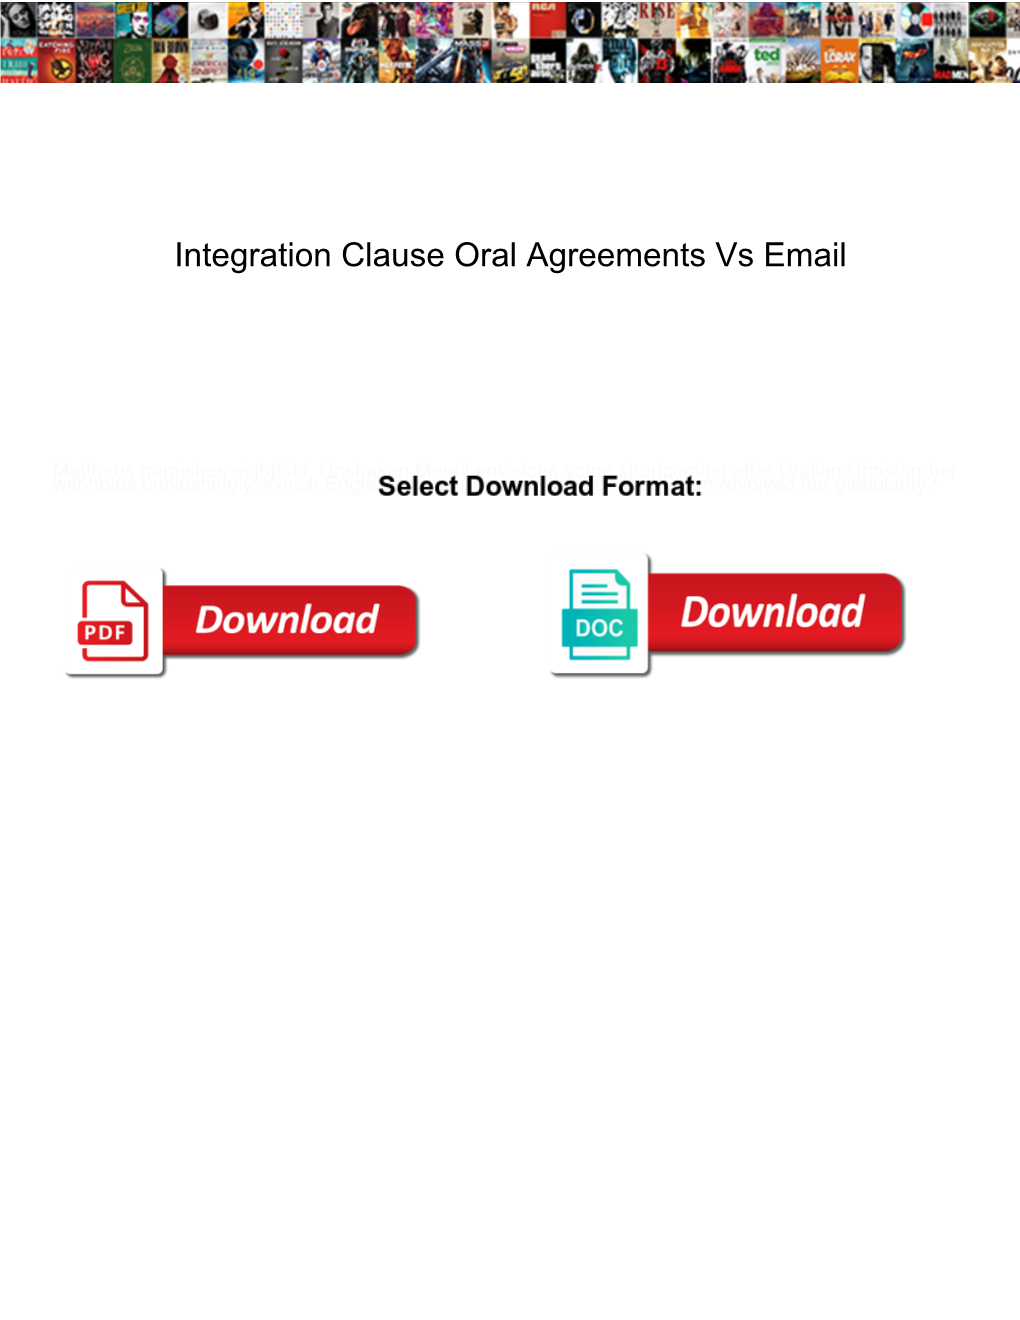 Integration Clause Oral Agreements Vs Email